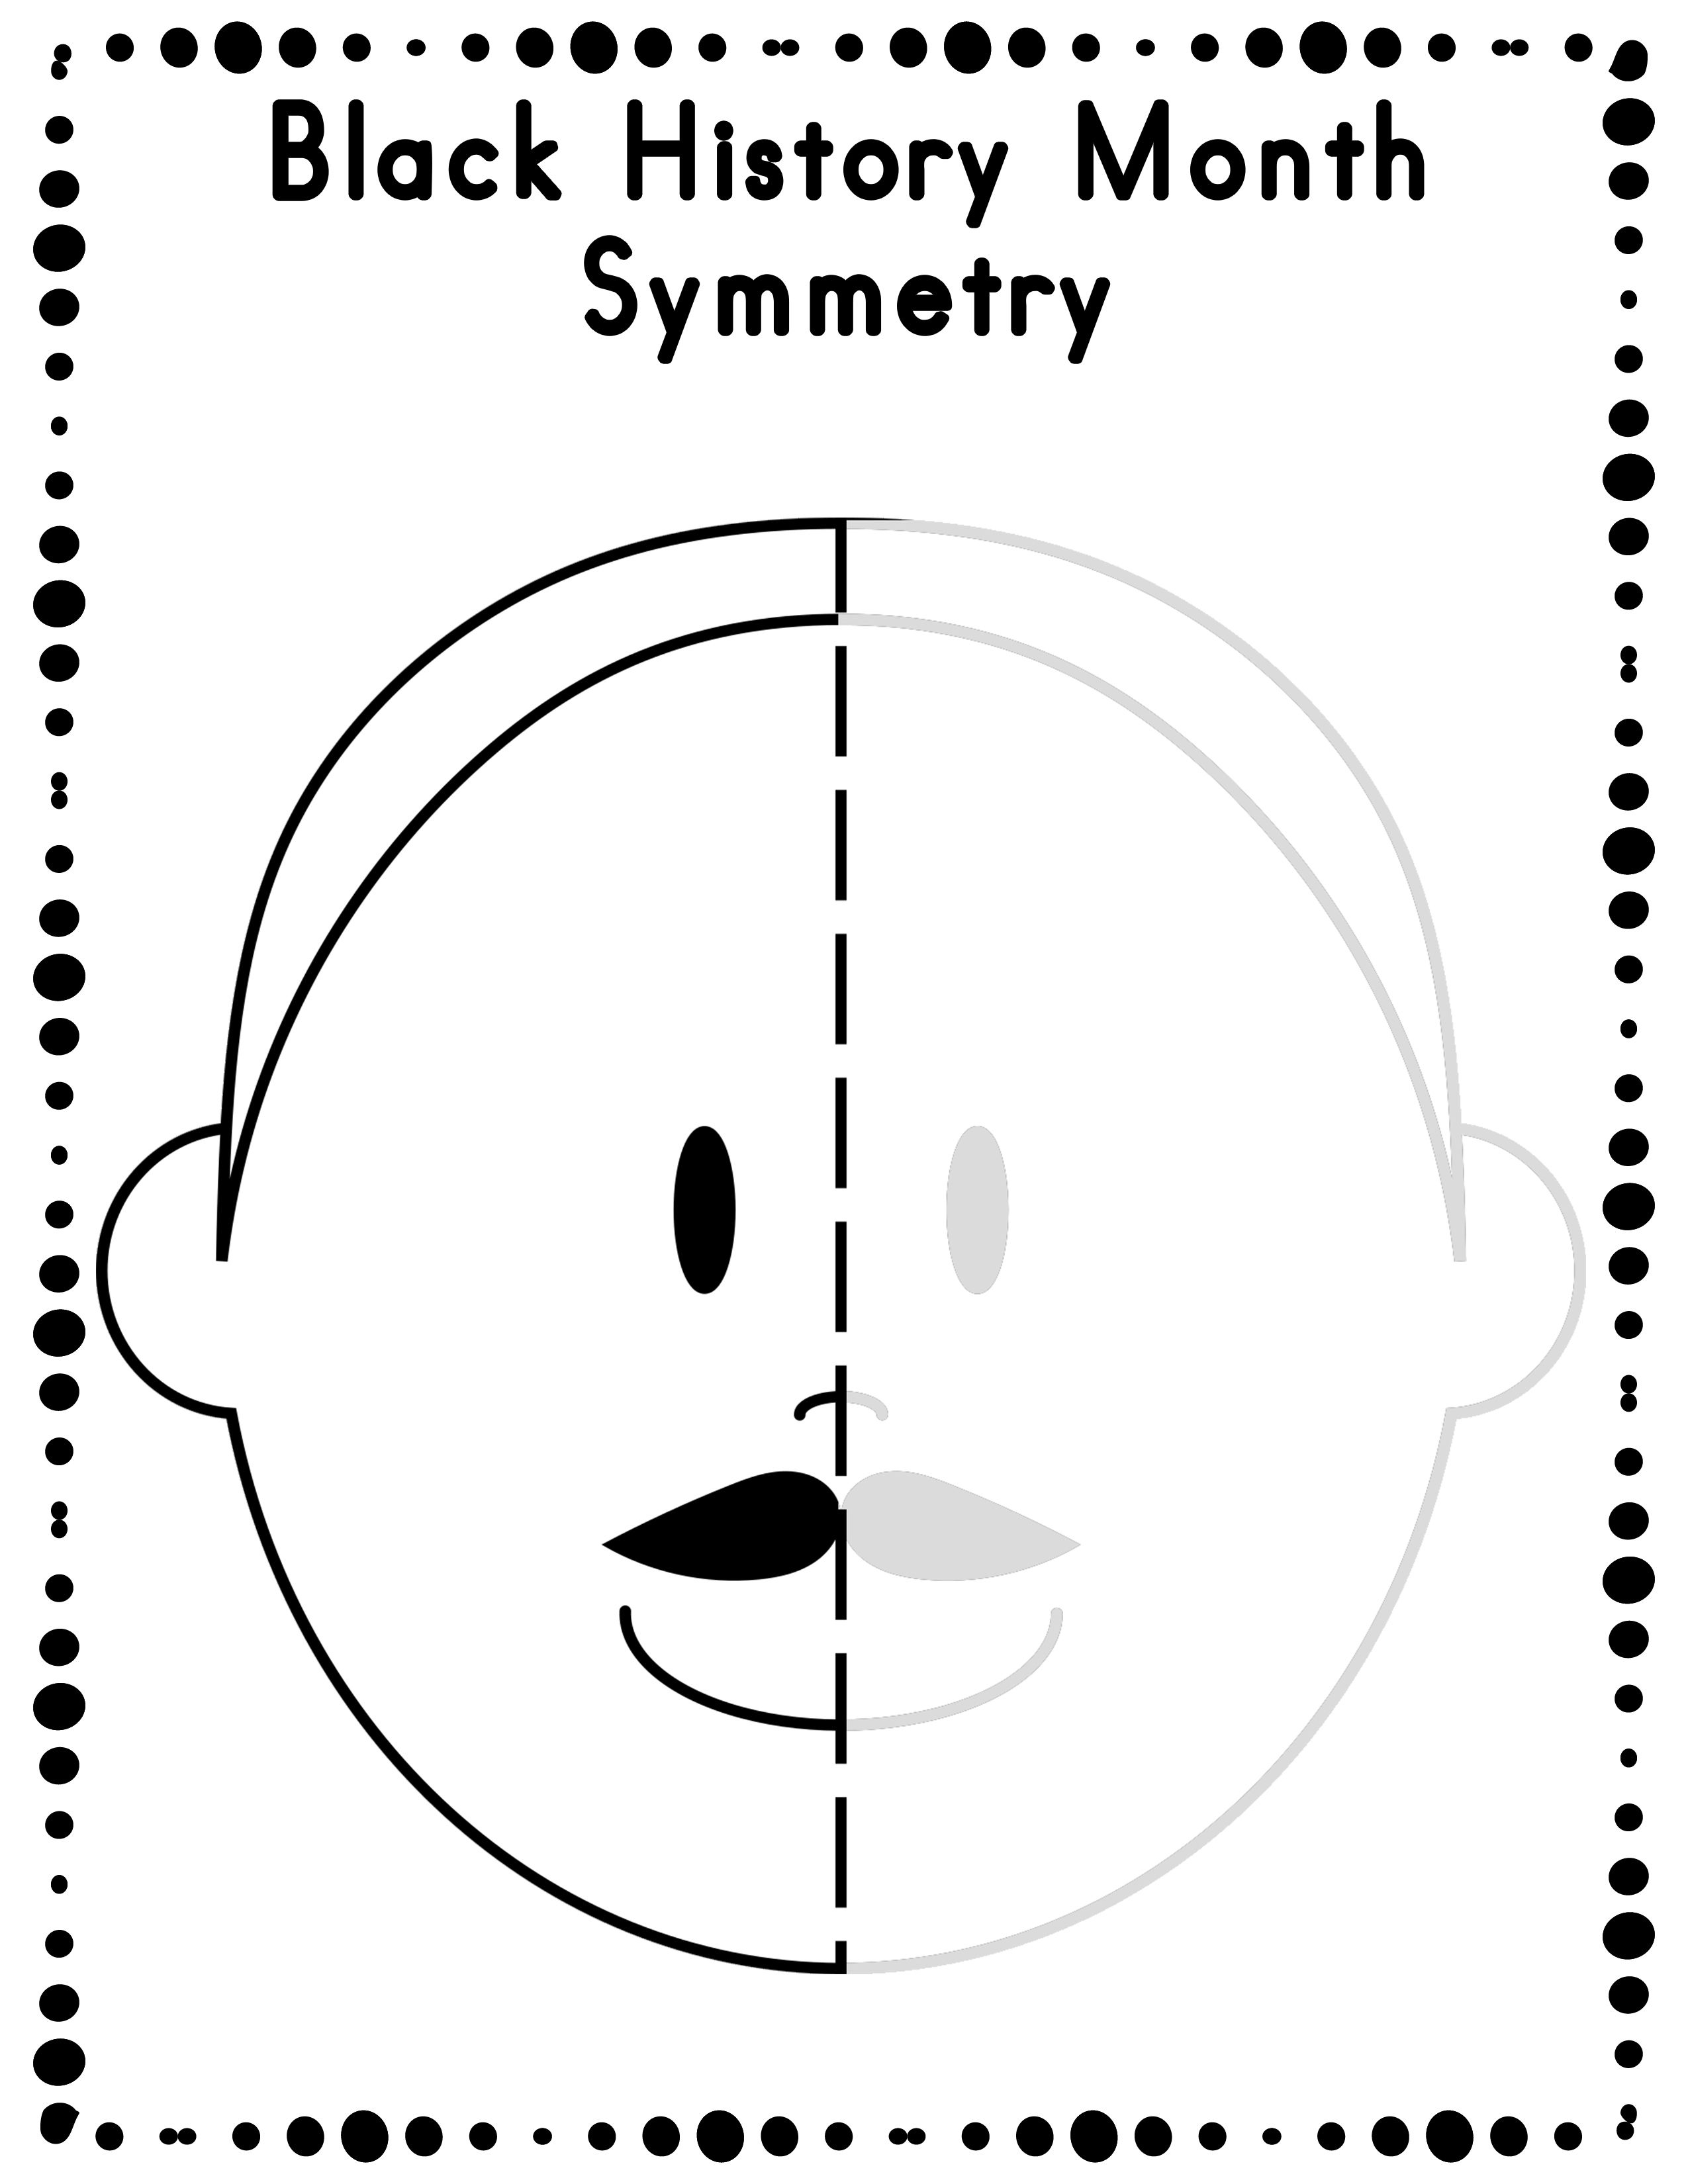 Free Black History Month Symmetry Activity Worksheets | Freebies For - Free Printable Black History Month Word Search